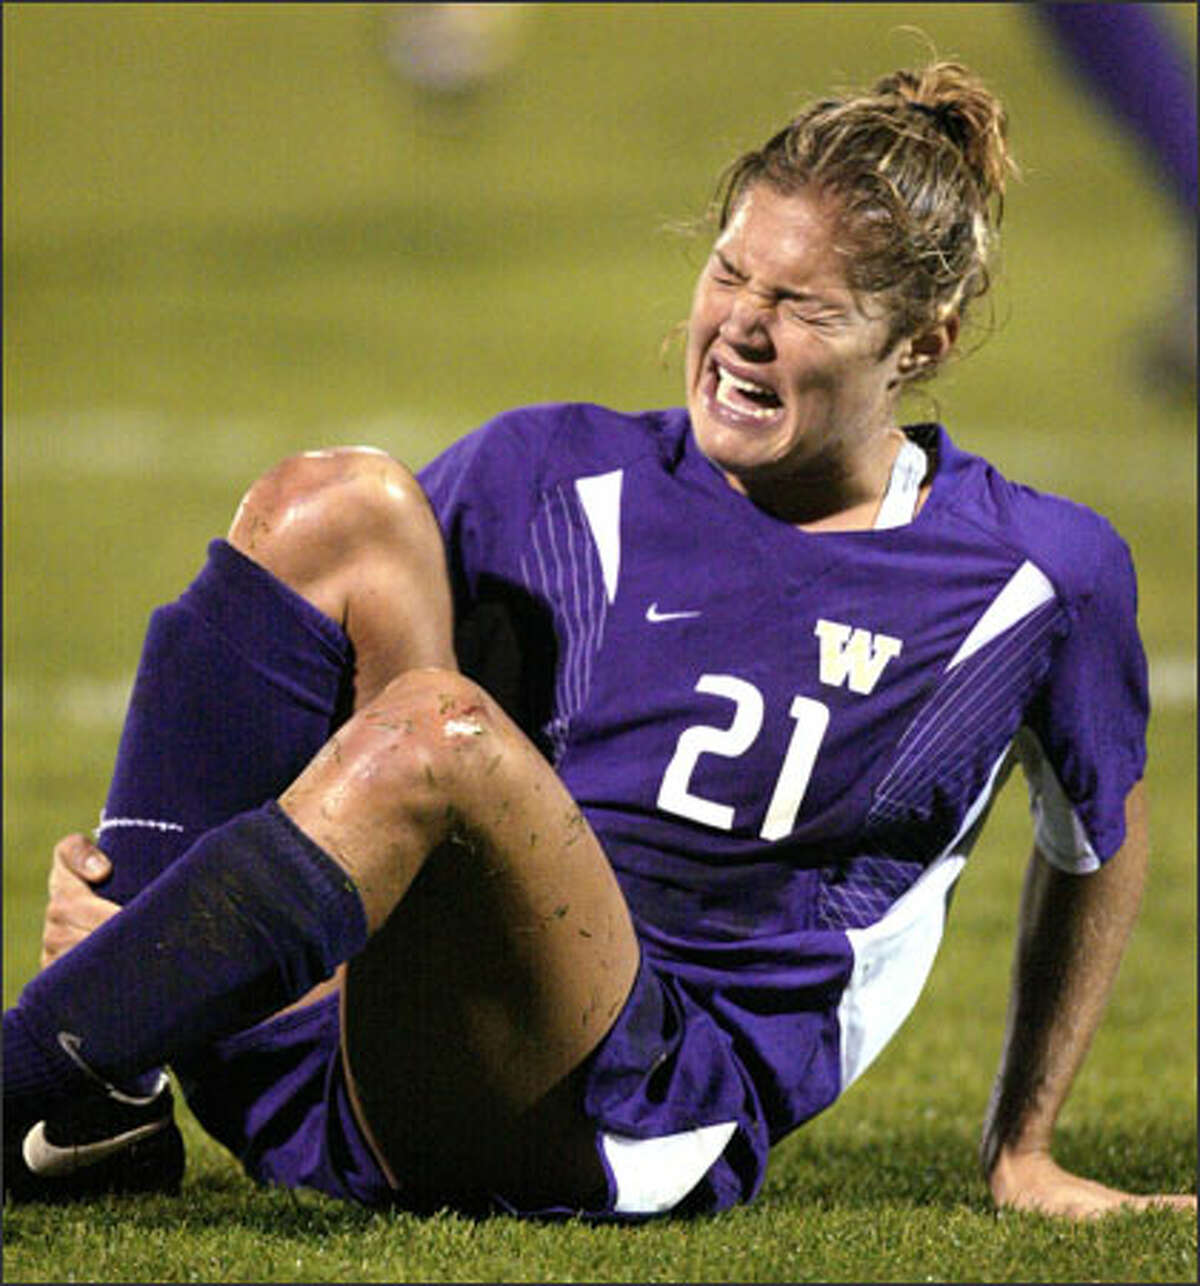 It's been a tough season all around for Kim Taylor, the only senior on the UW women's soccer team. Taylor is seventh in UW career goals but has none this season.